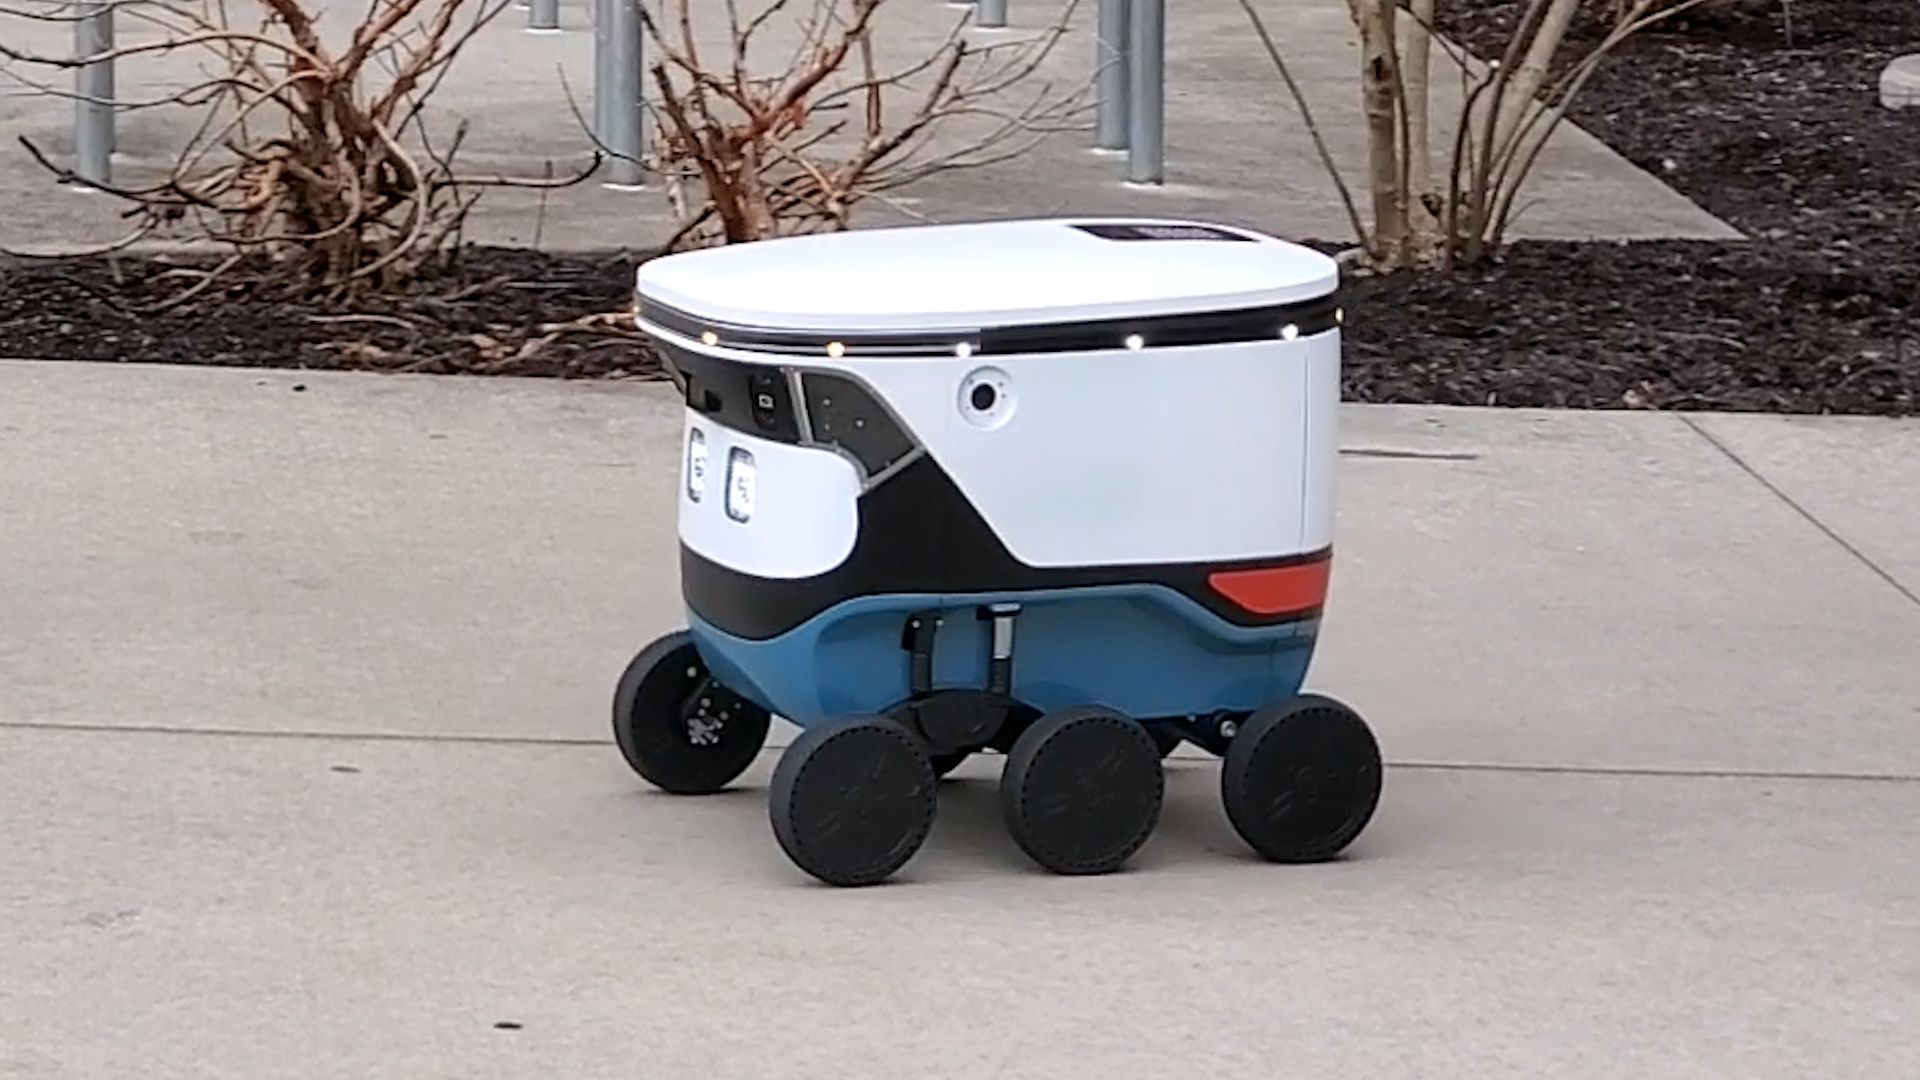 A food delivery rover on wheels